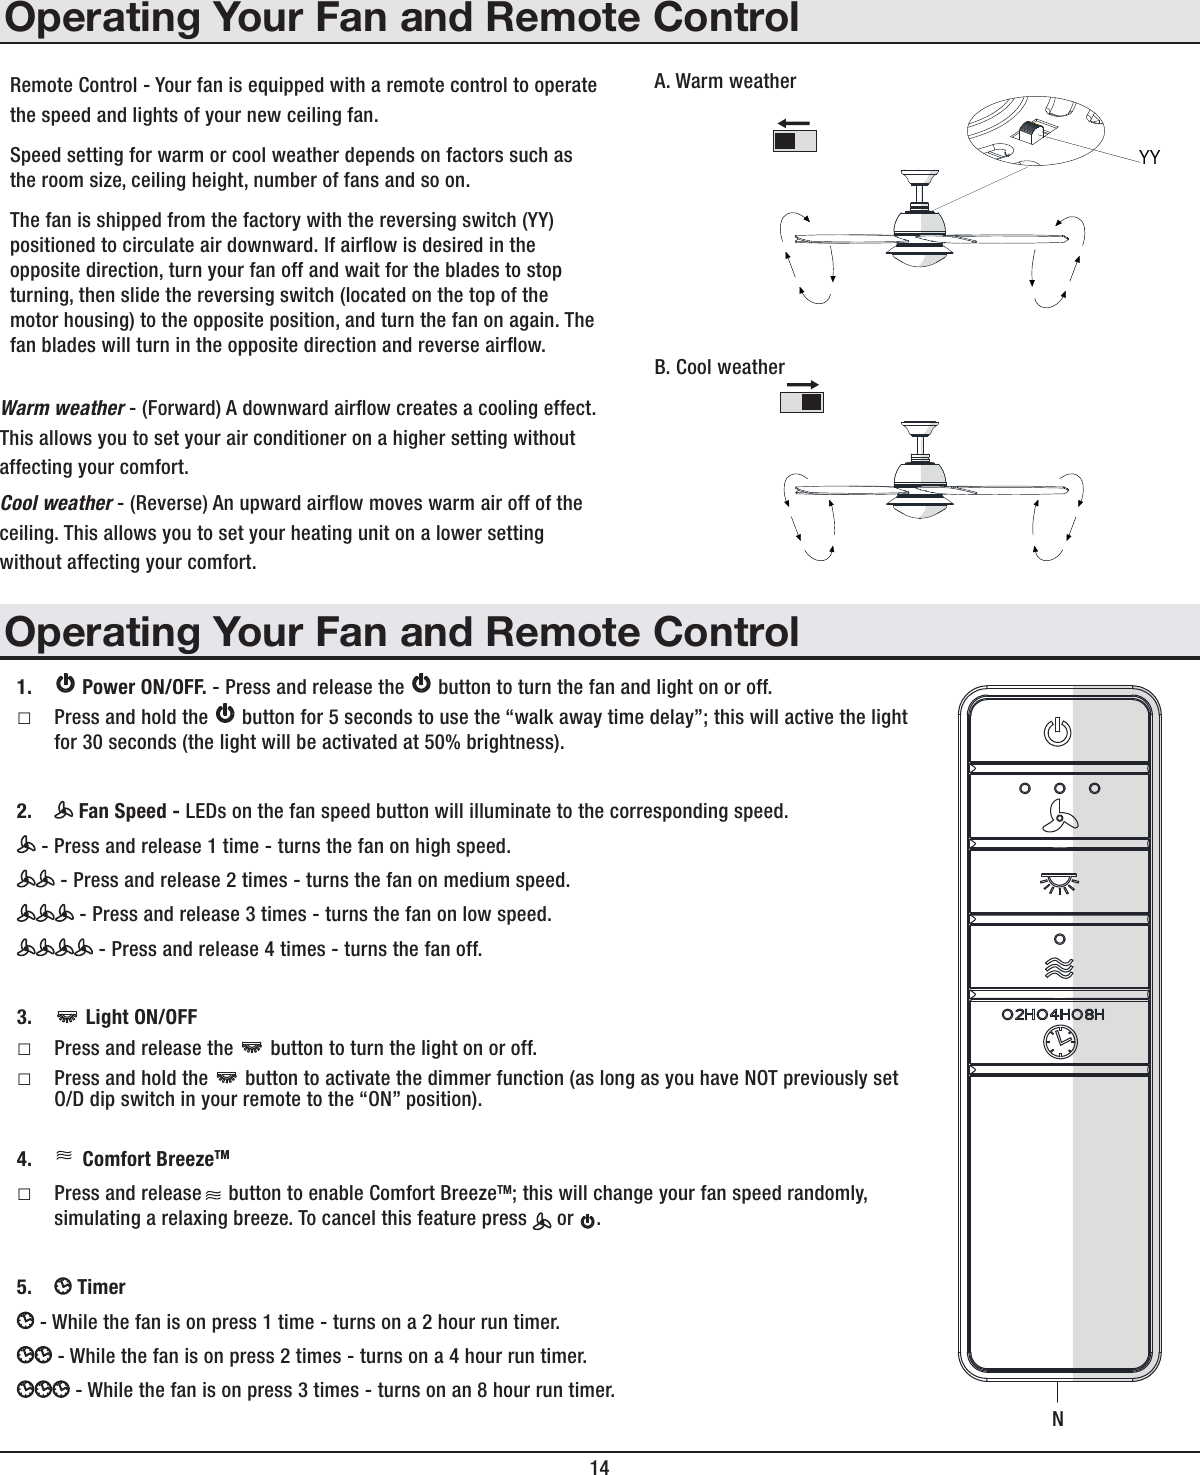 14Operating Your Fan and Remote ControlRemote Control - Your fan is equipped with a remote control to operatethe speed and lights of your new ceiling fan. Speed setting for warm or cool weather depends on factors such as the room size, ceiling height, number of fans and so on.The fan is shipped from the factory with the reversing switch (YY) positioned to circulate air downward. If airow is desired in the opposite direction, turn your fan off and wait for the blades to stop turning, then slide the reversing switch (located on the top of the motor housing) to the opposite position, and turn the fan on again. The fan blades will turn in the opposite direction and reverse airow.Warm weather - (Forward) A downward airow creates a cooling effect.This allows you to set your air conditioner on a higher setting withoutaffecting your comfort.Cool weather - (Reverse) An upward airow moves warm air off of theceiling. This allows you to set your heating unit on a lower settingwithout affecting your comfort.A. Warm weatherB. Cool weather1.    Power ON/OFF. - Press and release the   button to turn the fan and light on or off. □Press and hold the   button for 5 seconds to use the “walk away time delay”; this will active the light for 30 seconds (the light will be activated at 50% brightness).2.   Fan Speed - LEDs on the fan speed button will illuminate to the corresponding speed. - Press and release 1 time - turns the fan on high speed. - Press and release 2 times - turns the fan on medium speed. - Press and release 3 times - turns the fan on low speed. - Press and release 4 times - turns the fan off.3.    Light ON/OFF  □Press and release the   button to turn the light on or off. □Press and hold the   button to activate the dimmer function (as long as you have NOT previously set O/D dip switch in your remote to the “ON” position).4.   Comfort BreezeTM  □Press and release     button to enable Comfort BreezeTM; this will change your fan speed randomly, simulating a relaxing breeze. To cancel this feature press   or  .5.   Timer   - While the fan is on press 1 time - turns on a 2 hour run timer. - While the fan is on press 2 times - turns on a 4 hour run timer. - While the fan is on press 3 times - turns on an 8 hour run timer.Operating Your Fan and Remote ControlNYY